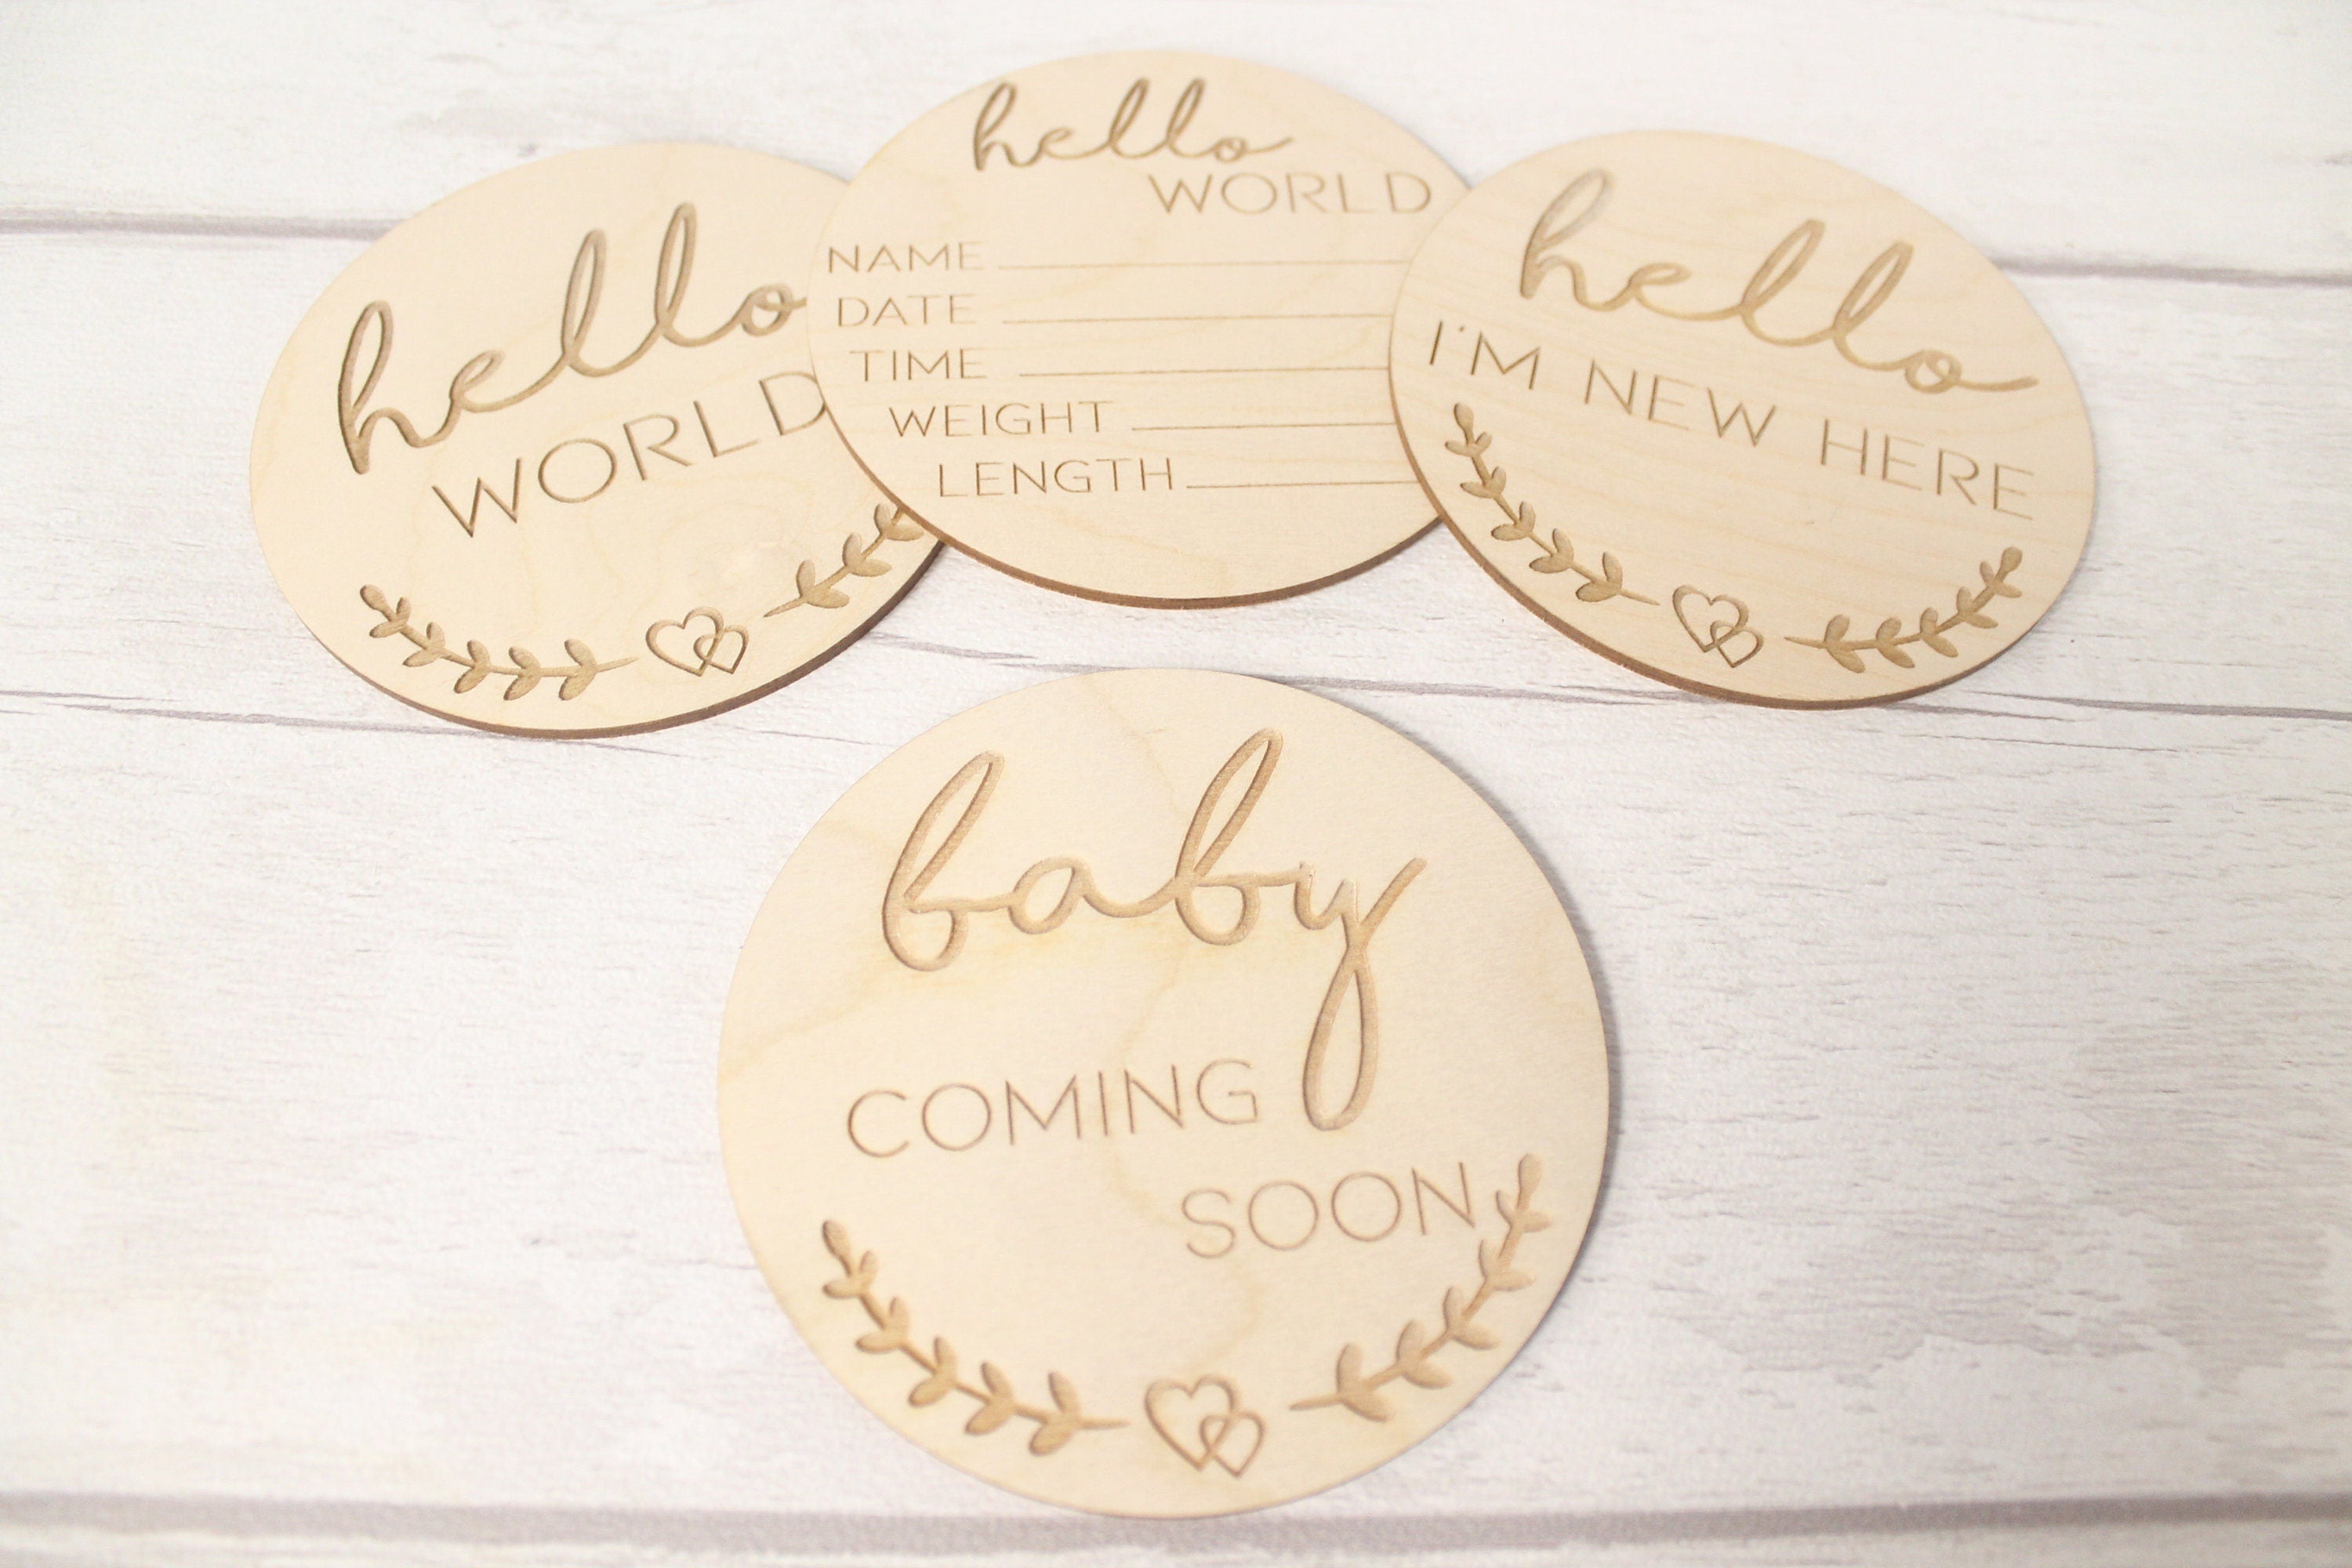 Baby's First Months New Baby Milestone Cards Sets - Hello World  - New Baby Photo Prop - Parent To Be or Baby Shower Gift - New Born gifts